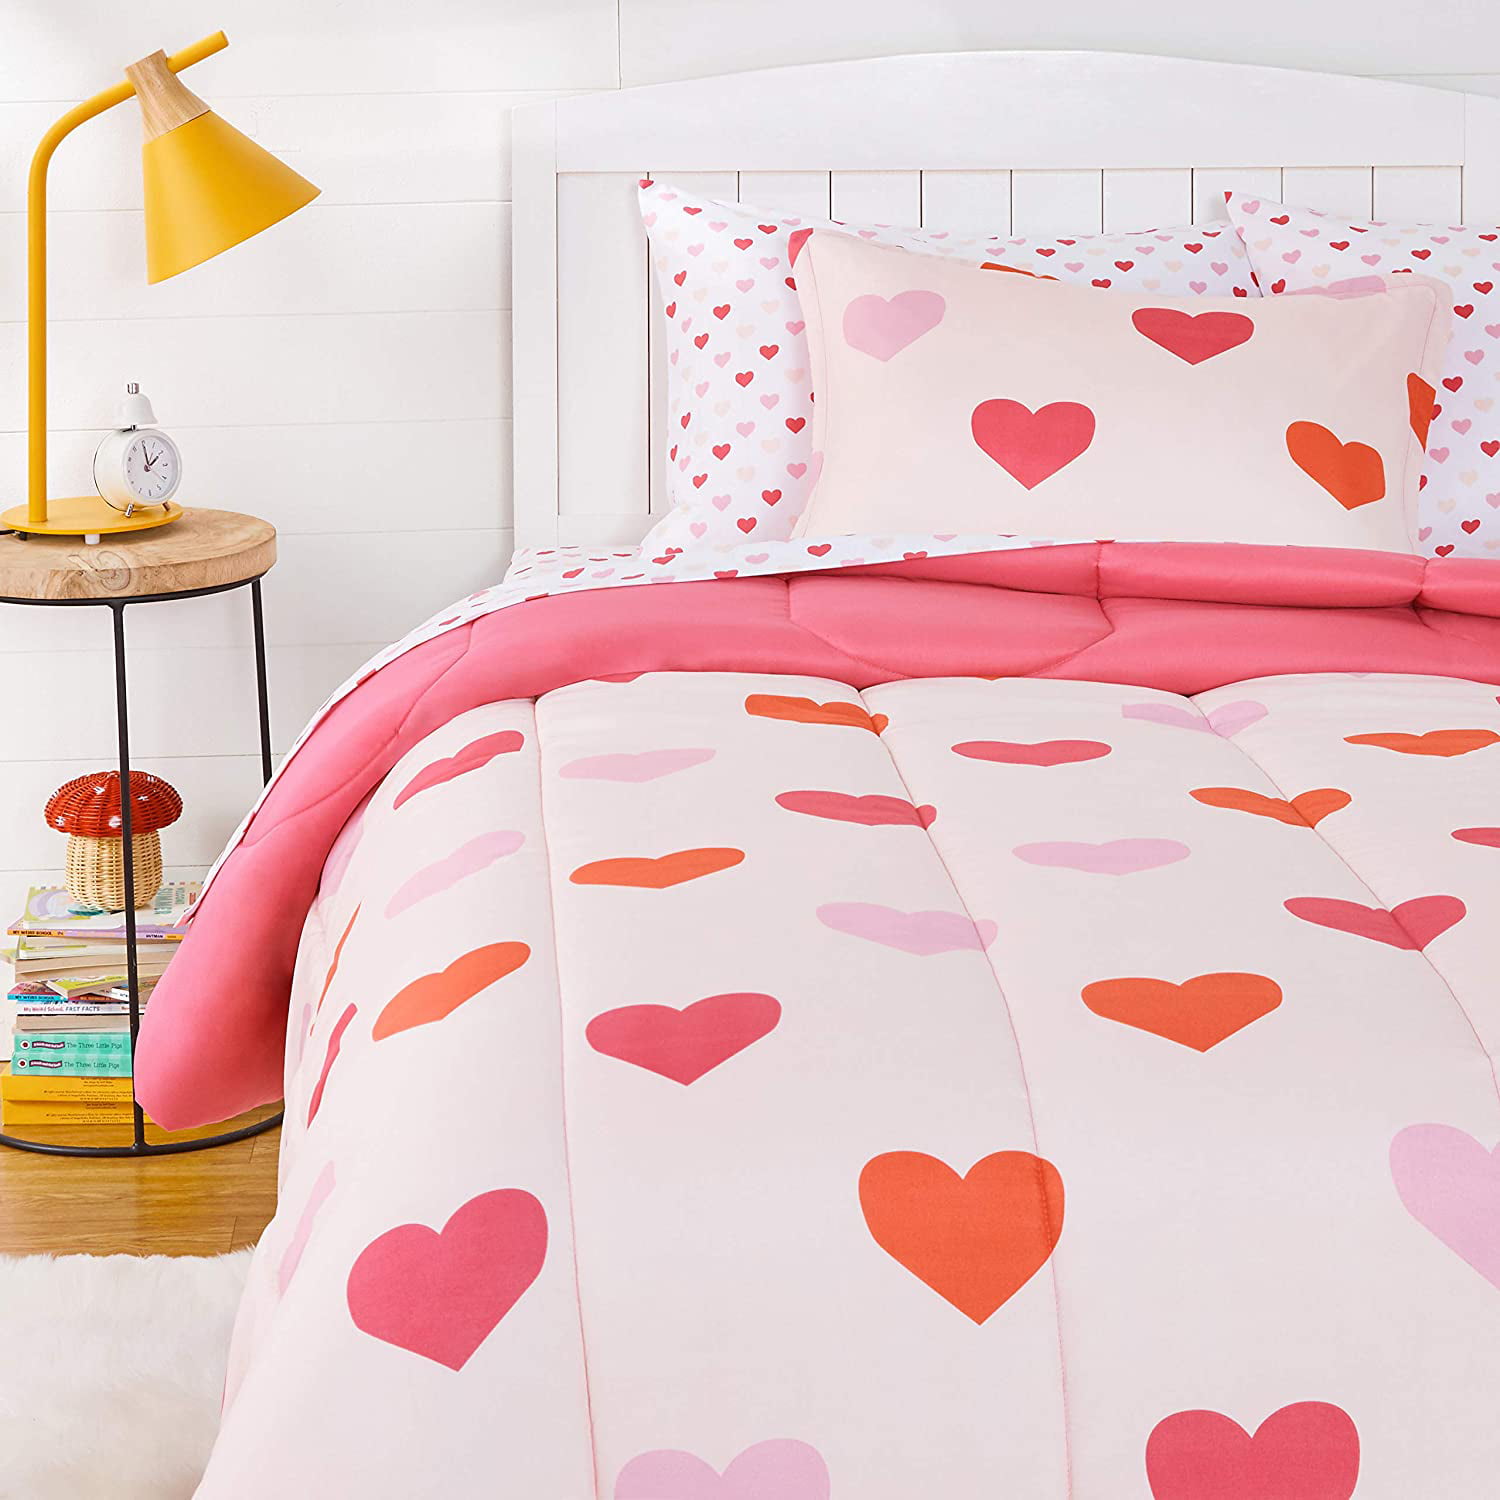 Mixed Bedding for Single and Double beds children and adults. 